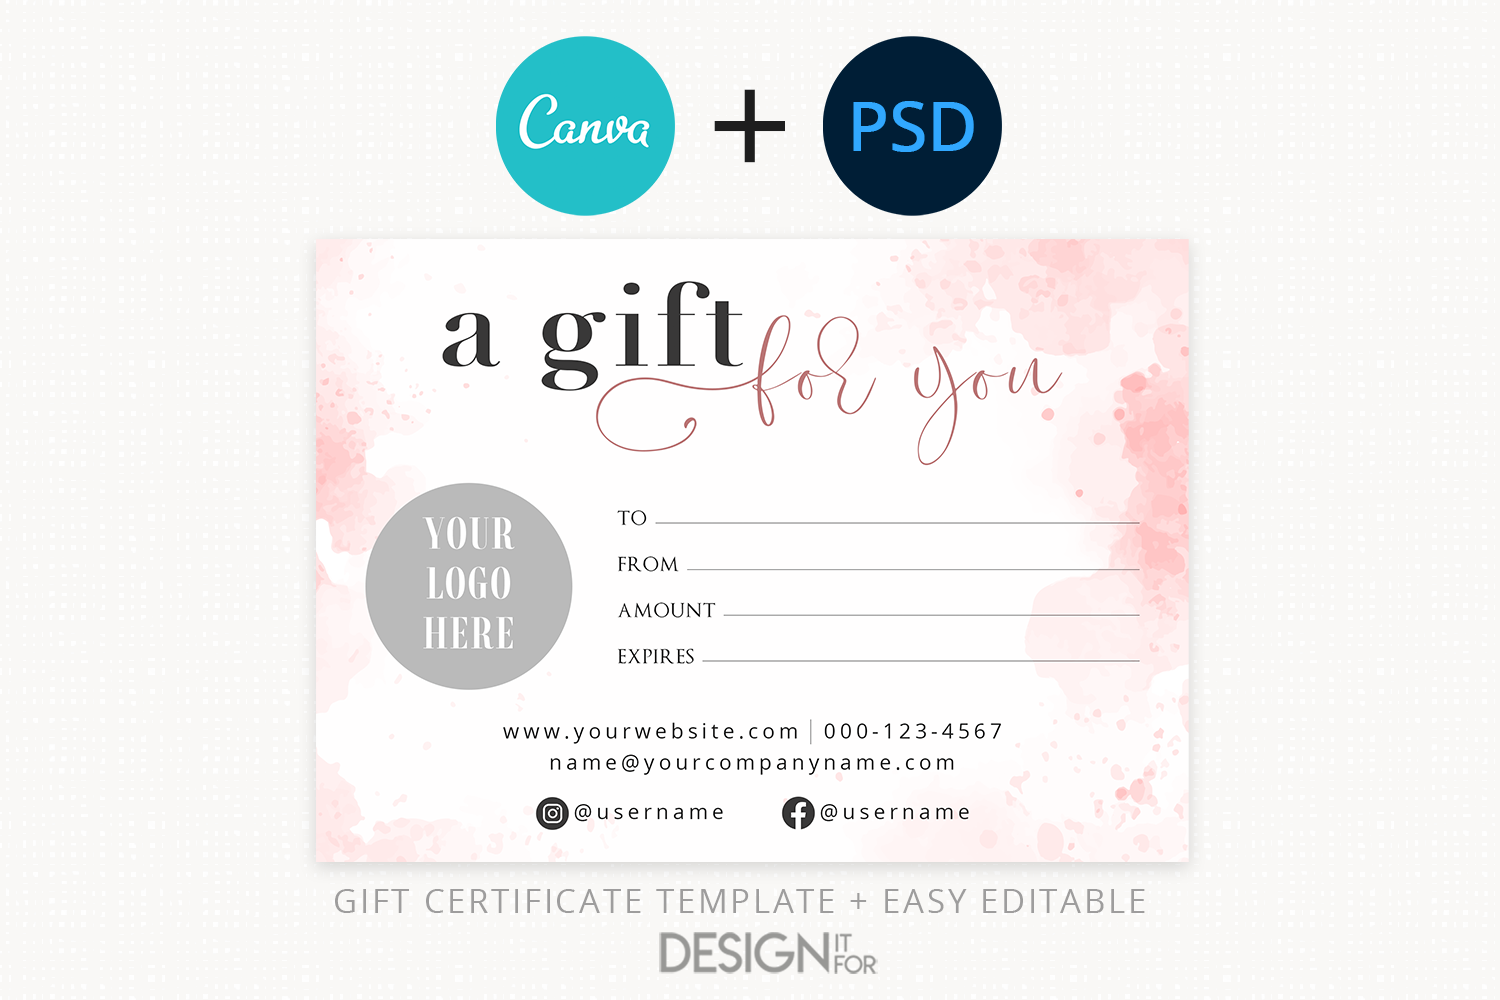 Pink Gift Certificate Template, Editable Gift Certificate Template, Canva, PSD, Printable , Social Icons Digital Gift Certificate, 5x7 Gift 1